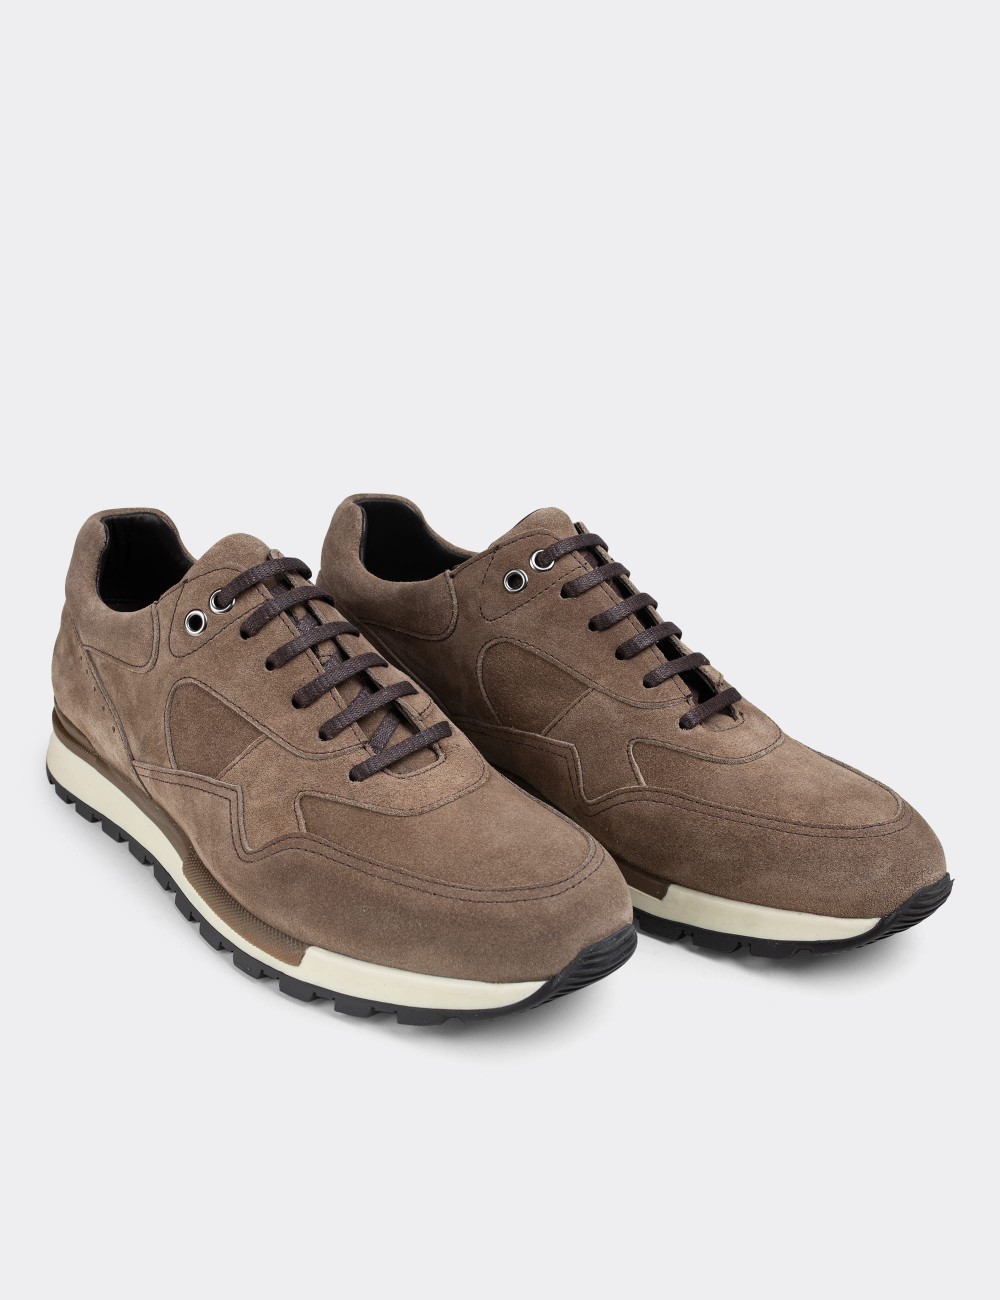 Sandstone Suede Leather Sneakers - 01818MVZNT01